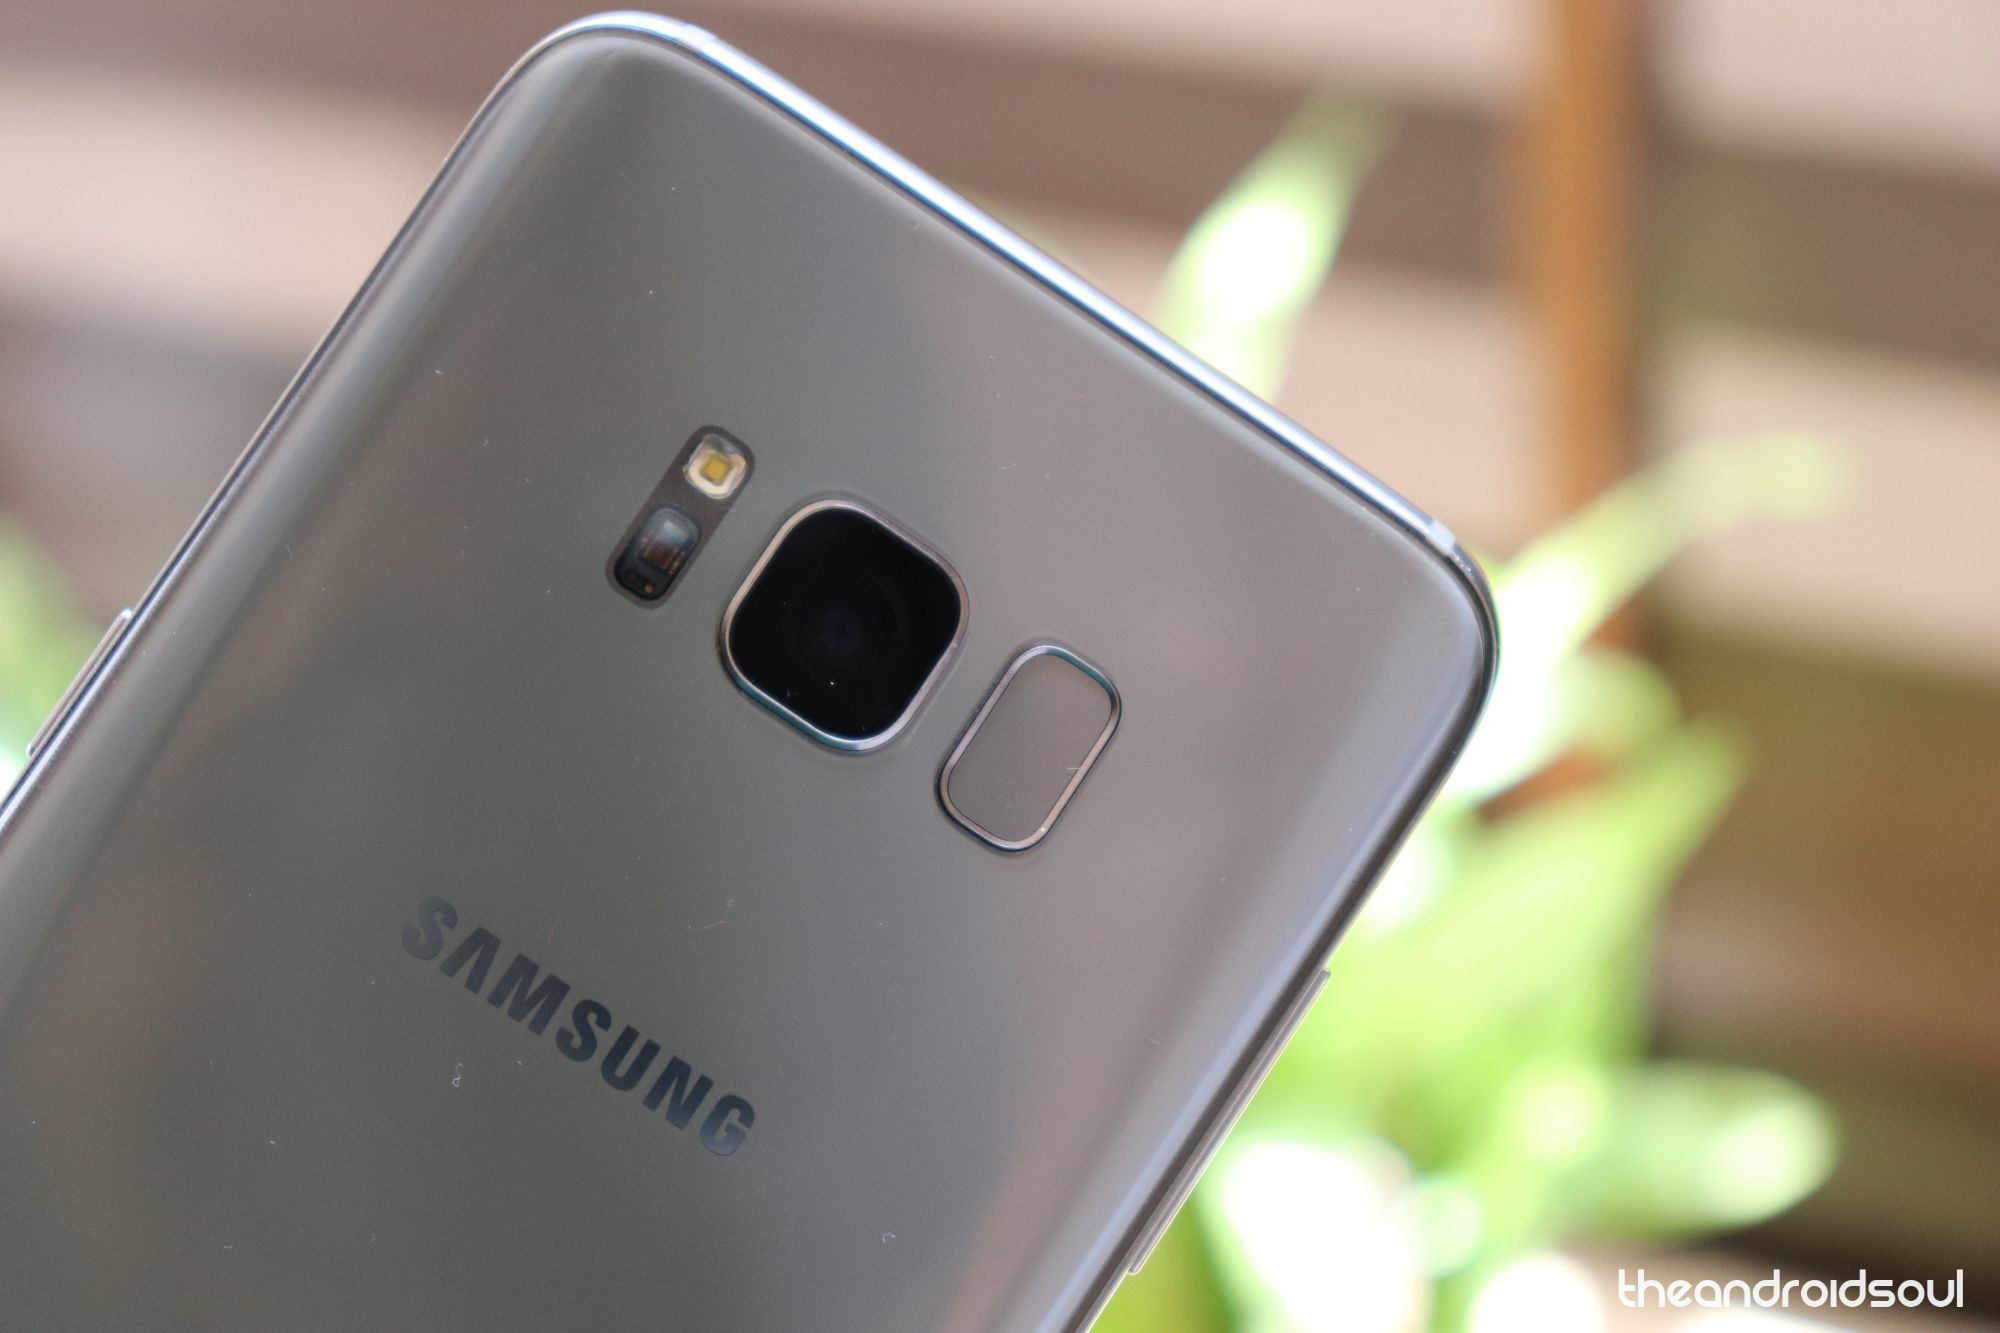 Galaxy S8 Update February 2020 Security Patch Released